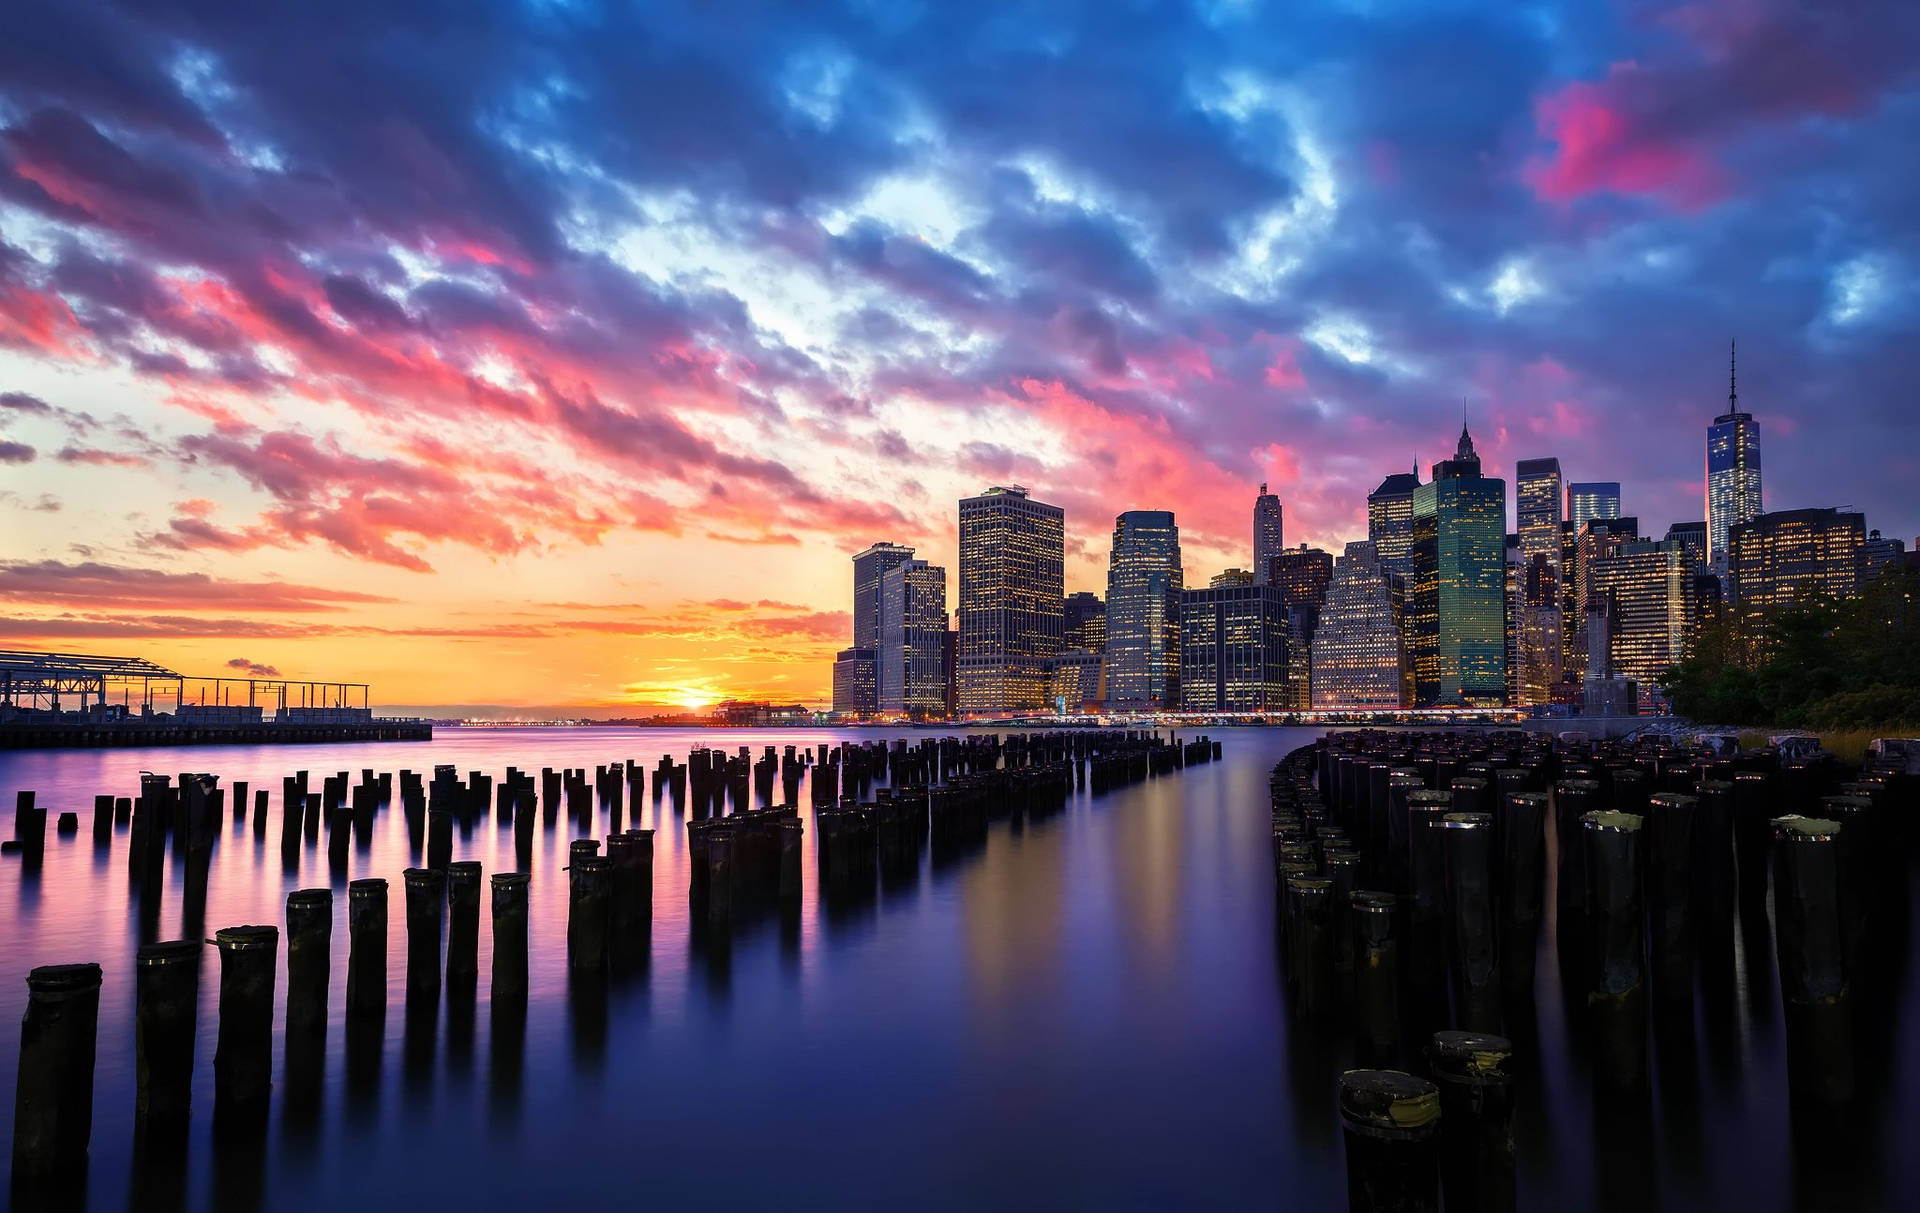 "The Spectacular Skyscrapers of New York City" Wallpaper